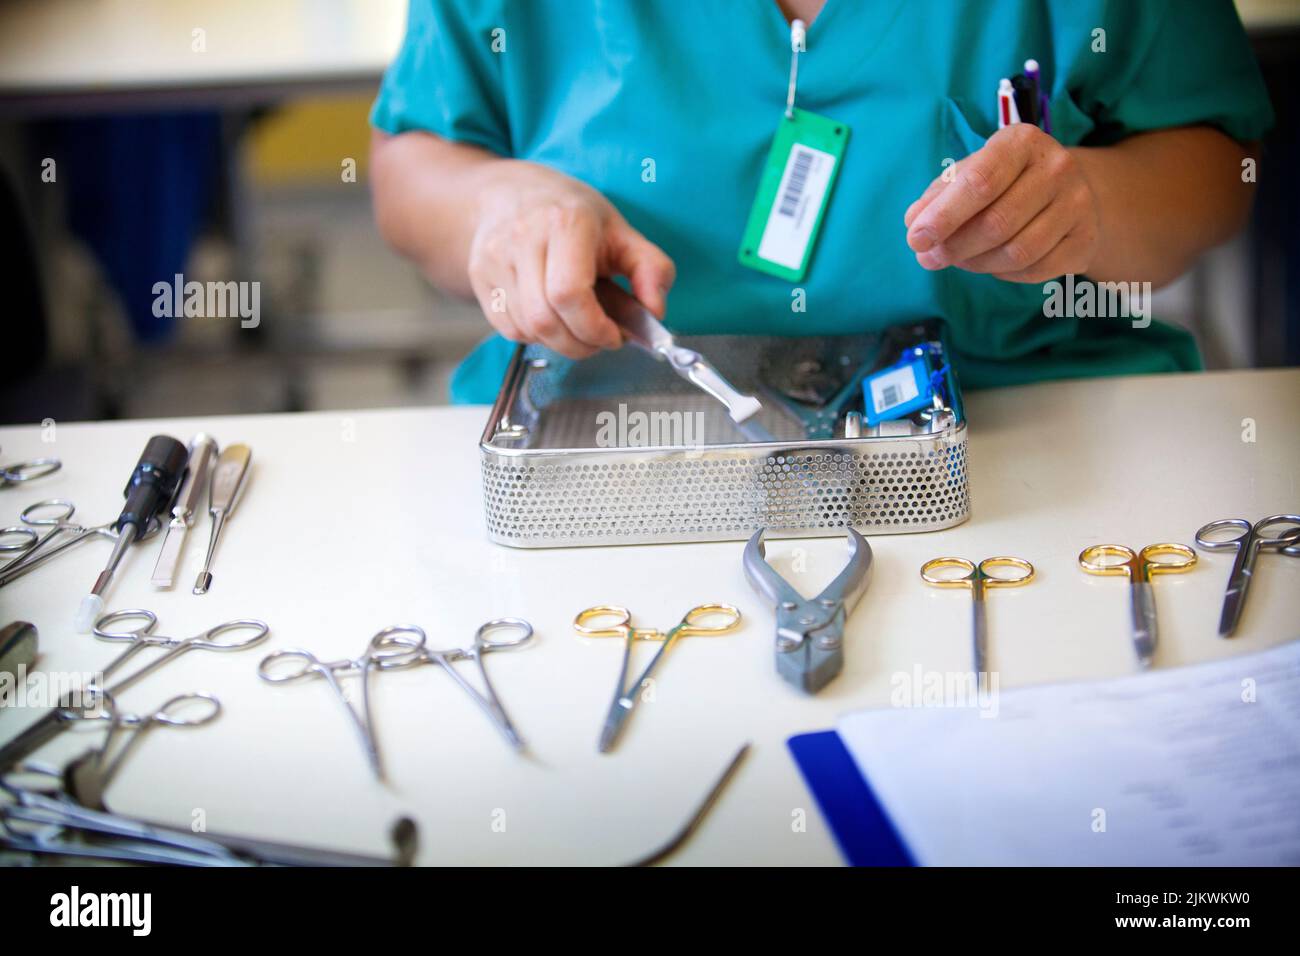 Before sterilization of surgical instruments, a nursing assistant recomposes the boxes of instruments used in the operating room. Stock Photo